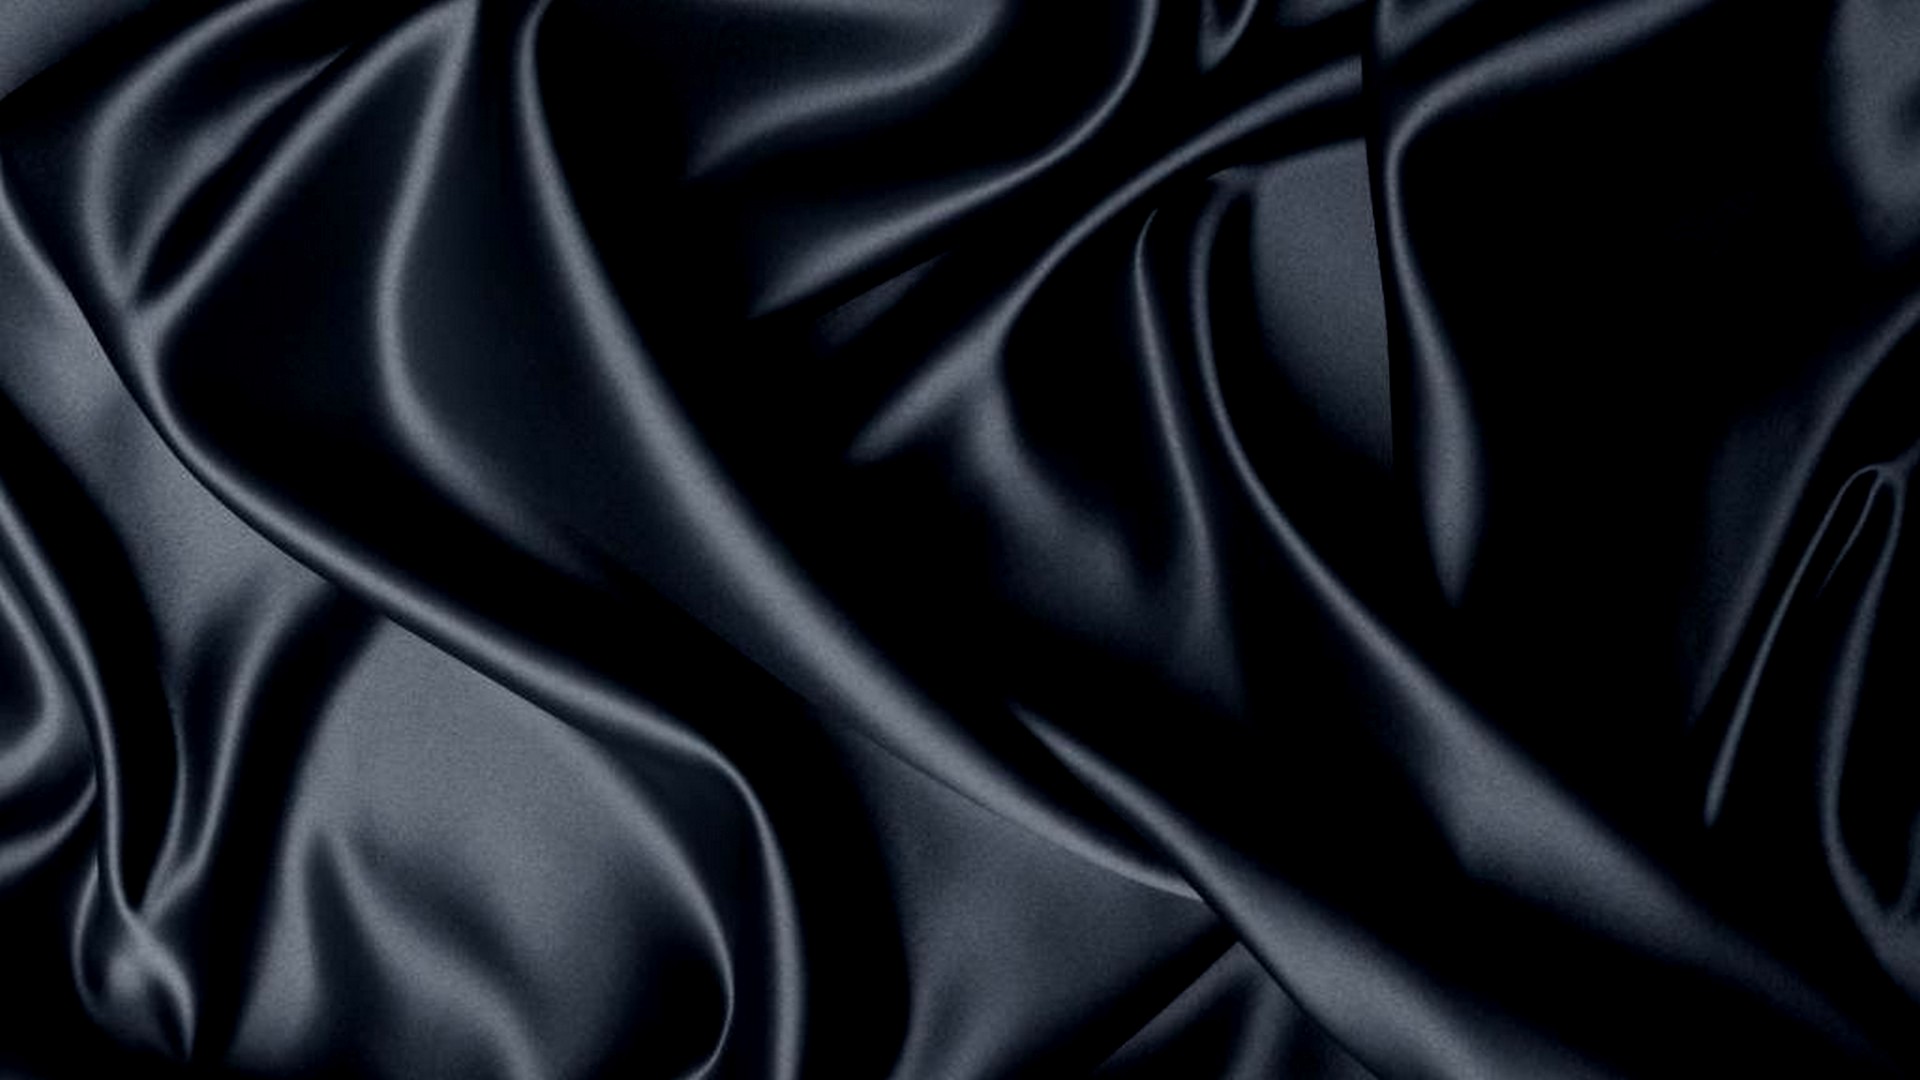 Wallpaper HD Black Silk With high-resolution 1920X1080 pixel. You can use this wallpaper for your Desktop Computer Backgrounds, Mac Wallpapers, Android Lock screen or iPhone Screensavers and another smartphone device